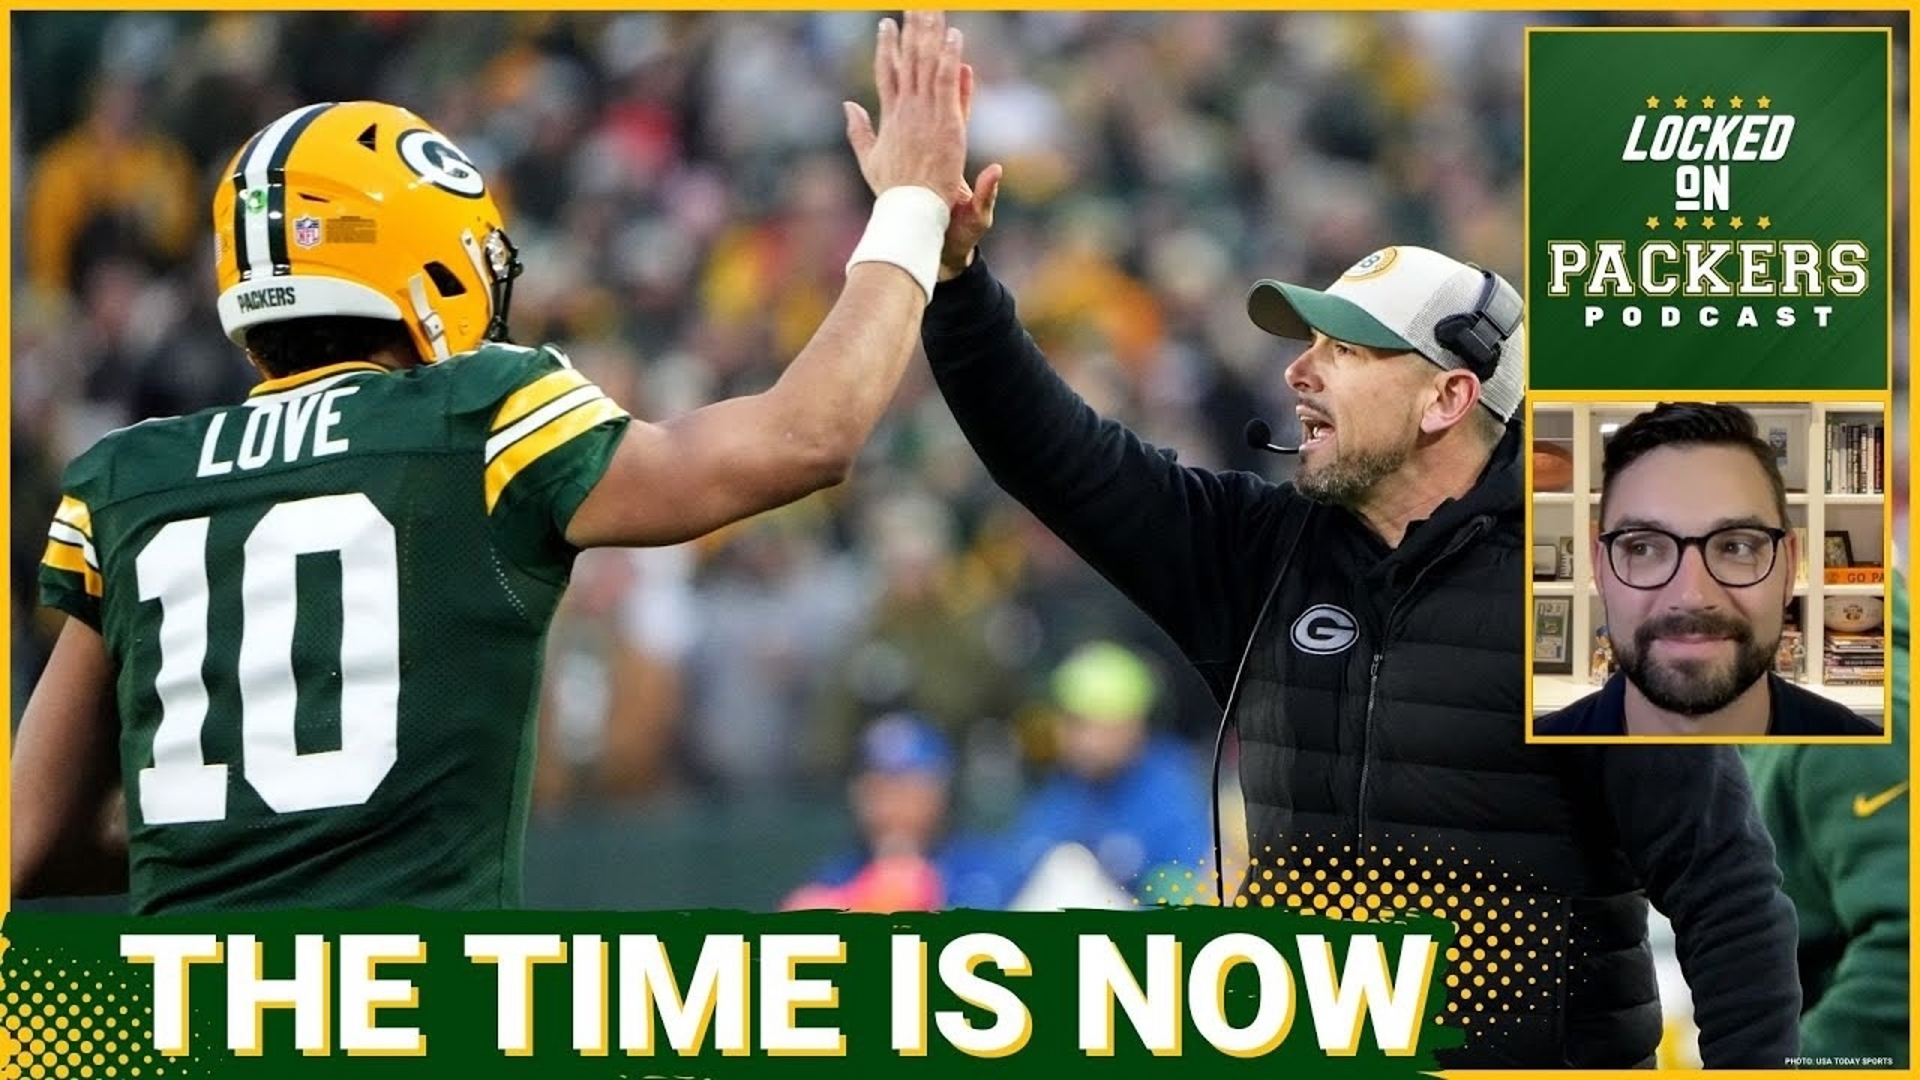 As Kevin Greene once said: "It is time. It is time." It's only going to get tougher for the Packers to a win Super Bowl.